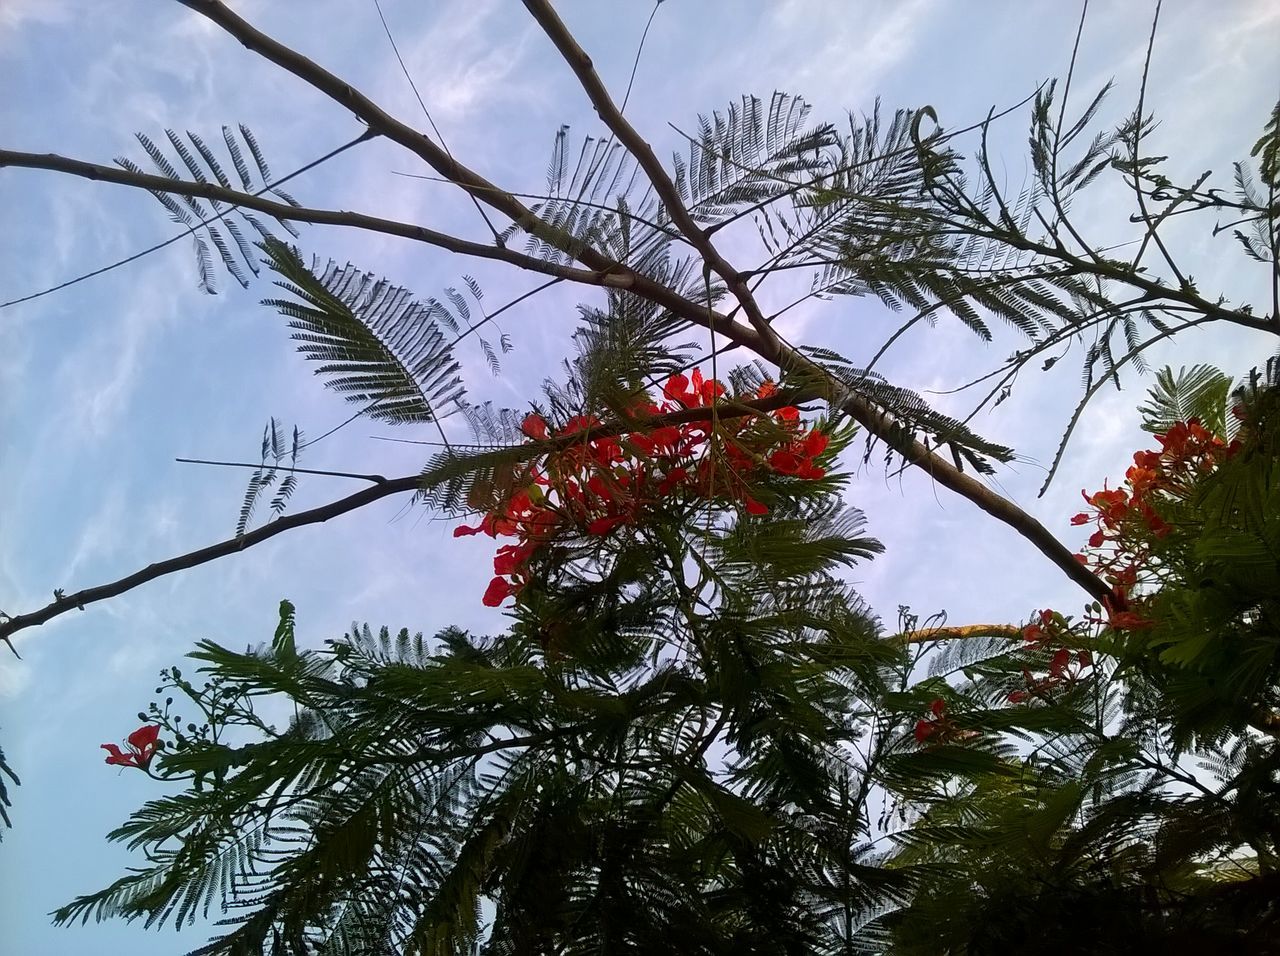 tree, growth, low angle view, nature, branch, beauty in nature, sky, red, no people, outdoors, day, freshness, close-up